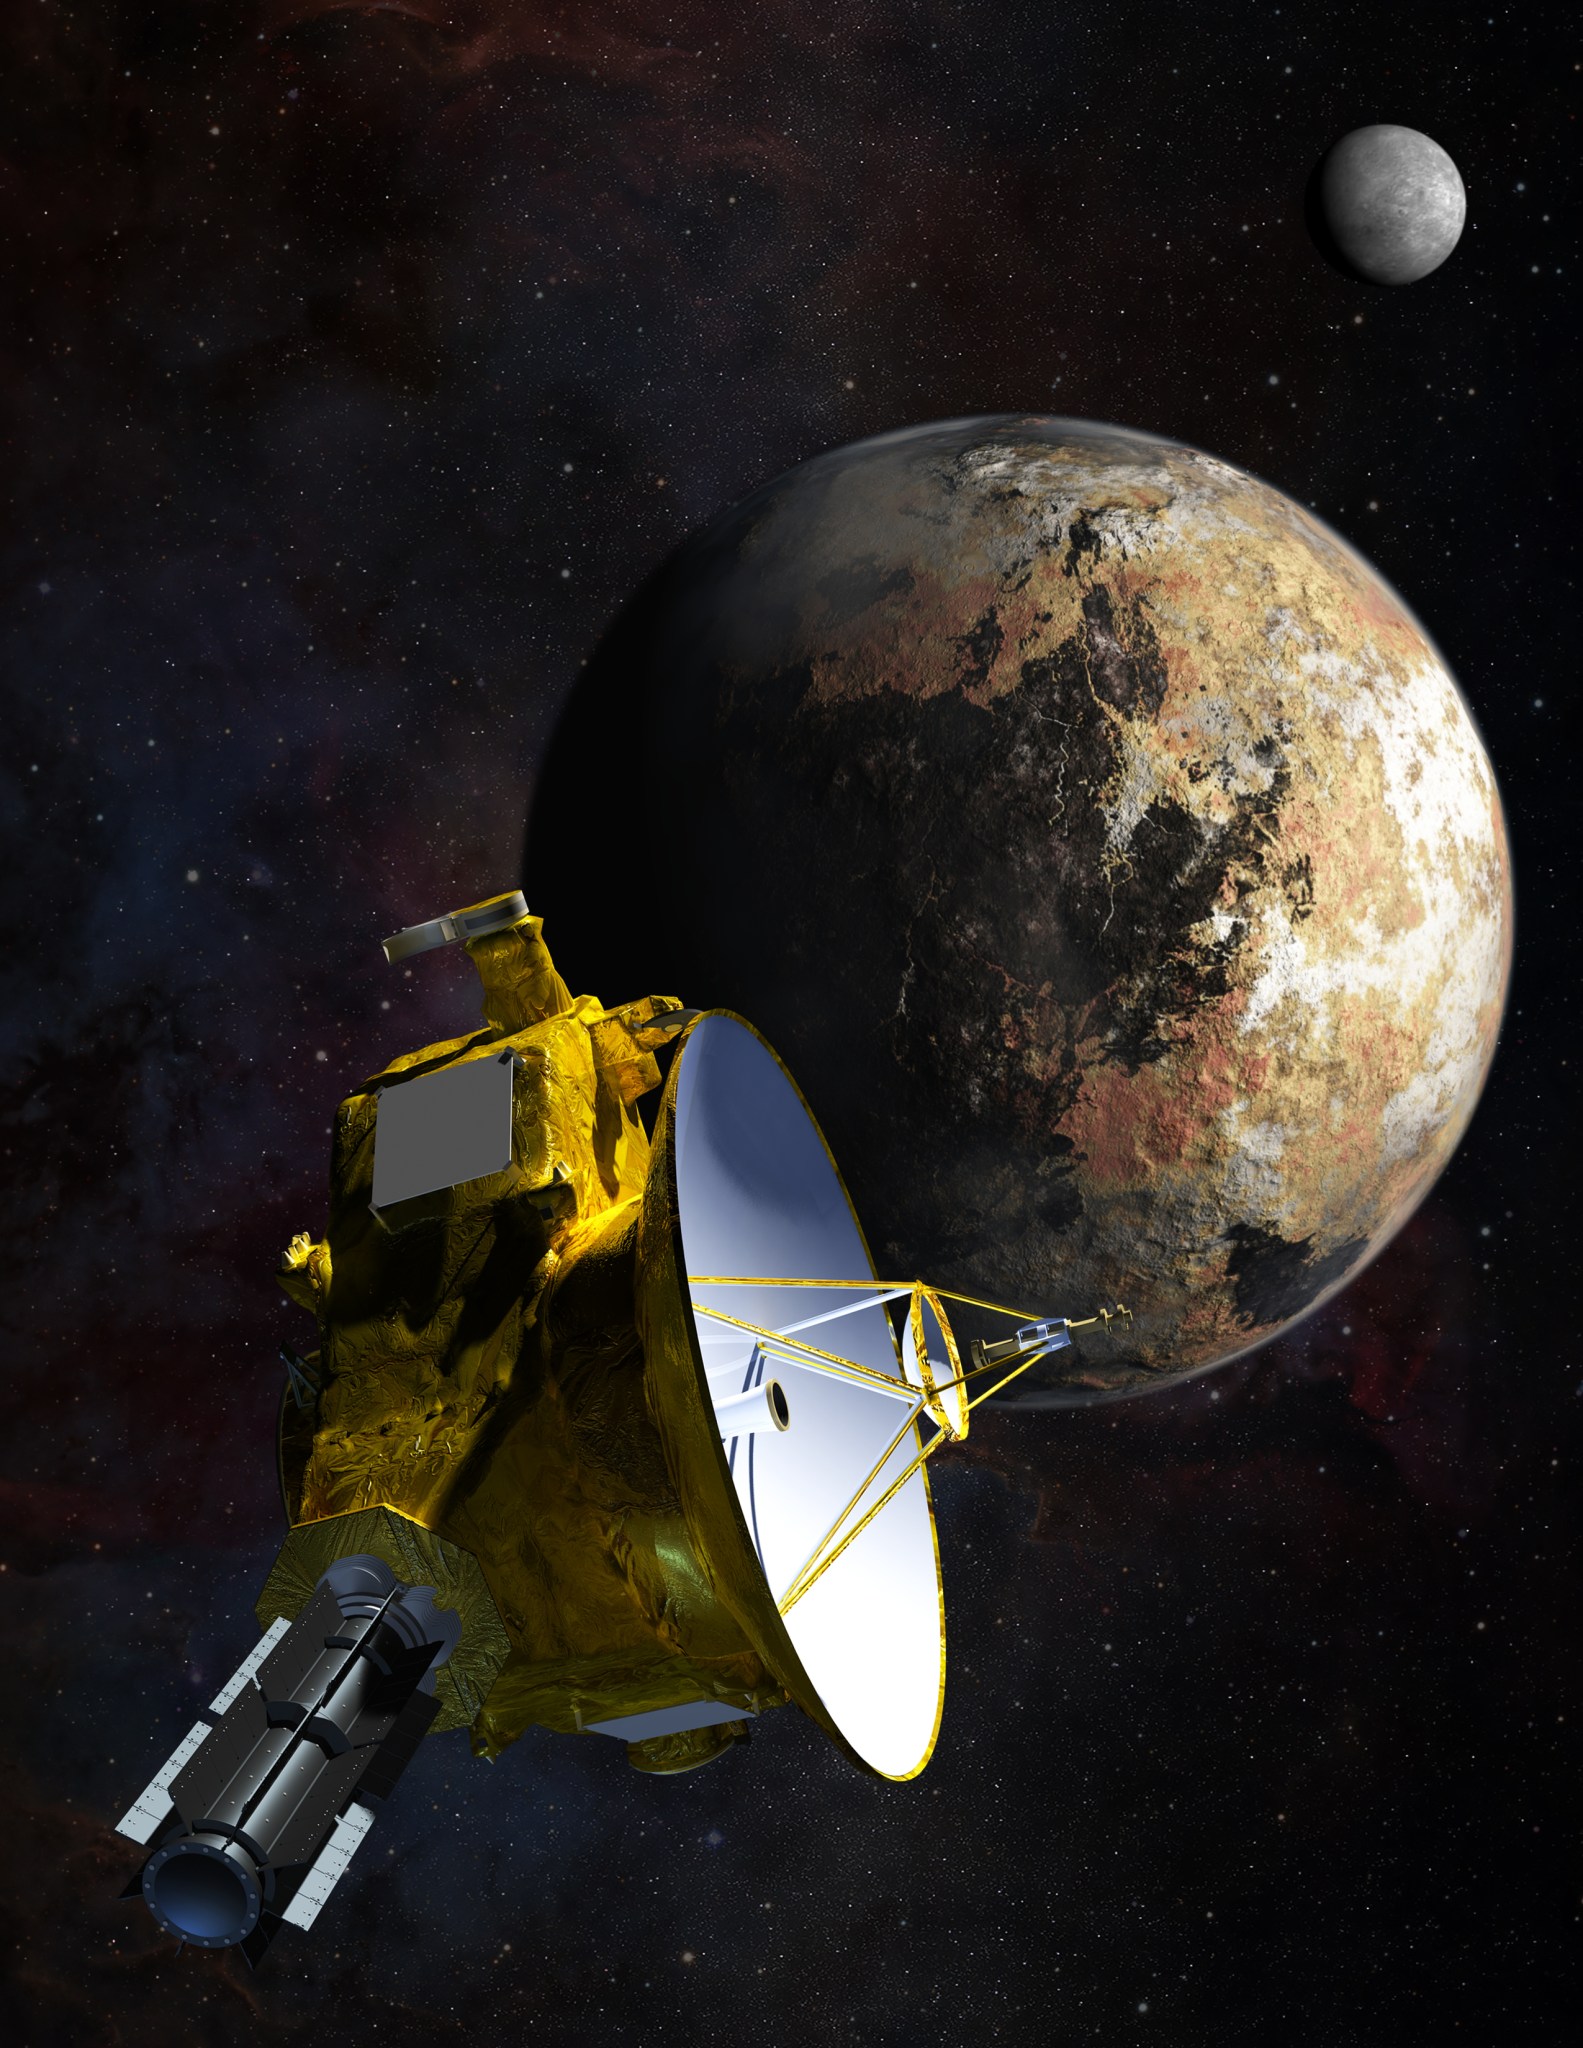 An illustration shows the New Horizons spacecraft in front of Pluto and its largest moon, Charon.